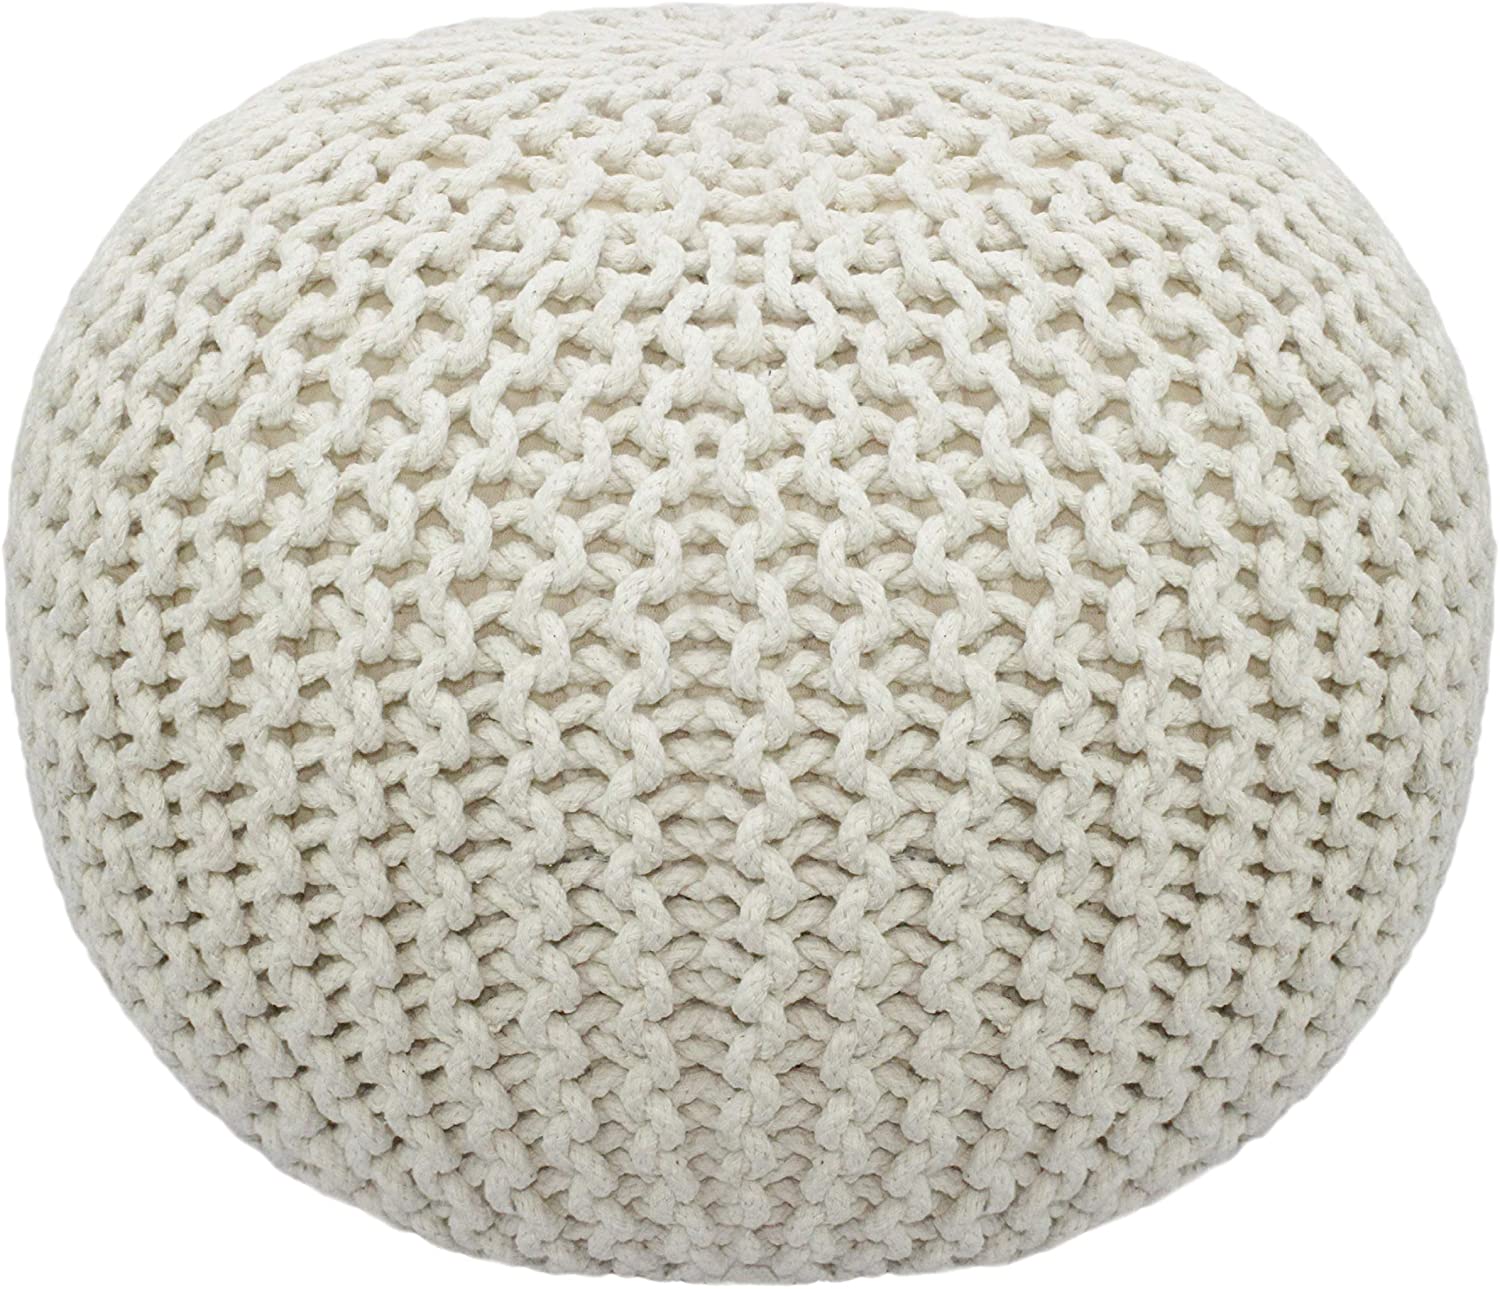 COTTON CRAFT Twisted Rope Footrest Pouf